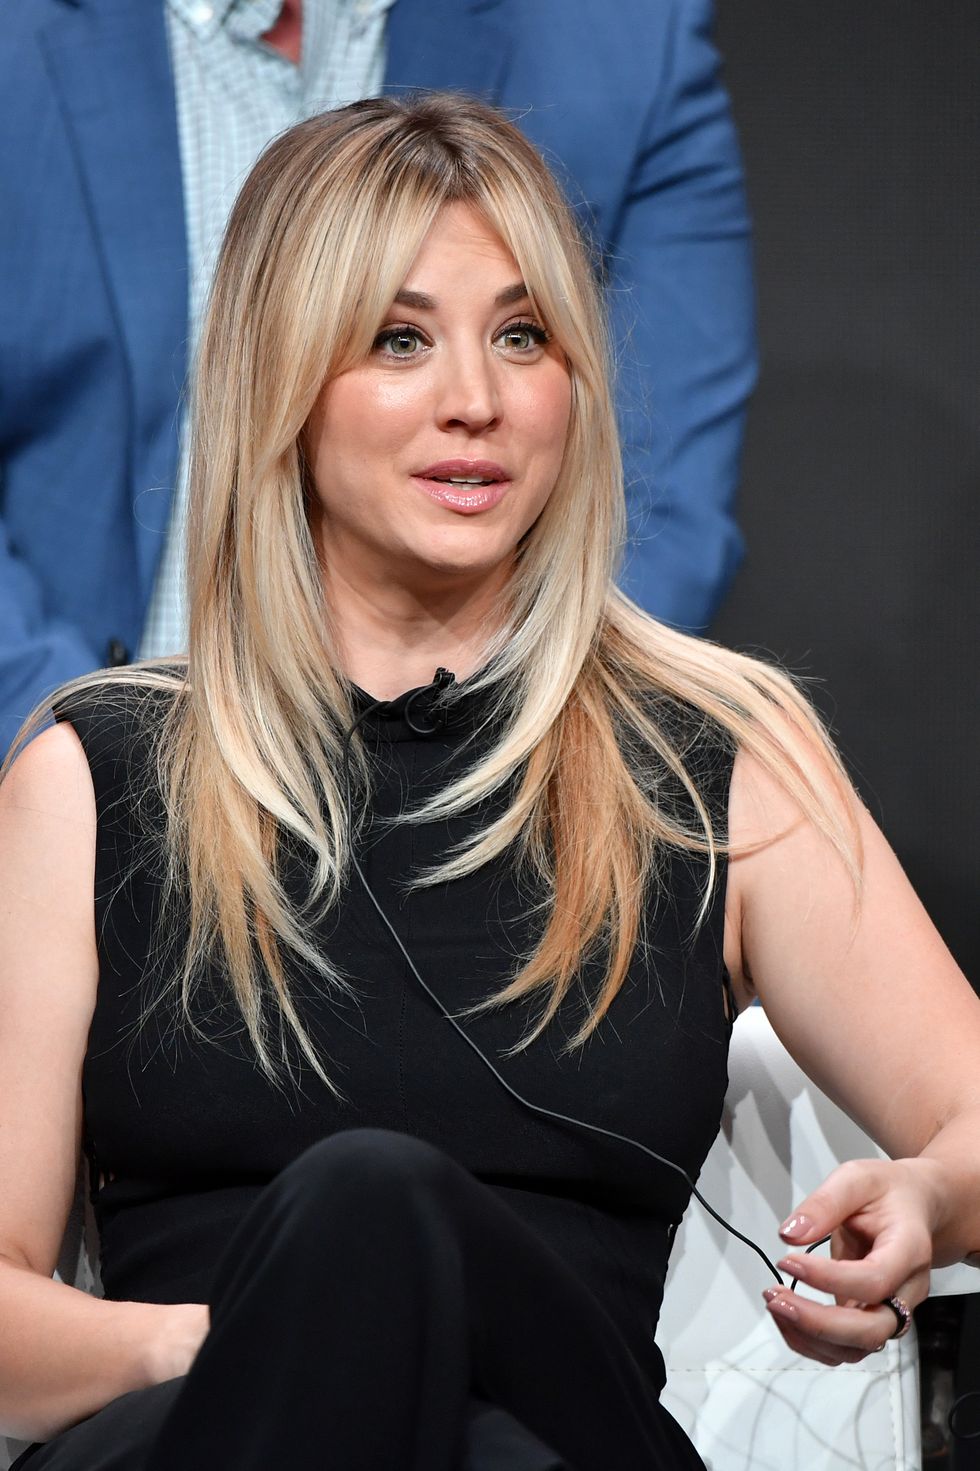 beverly hills, california   july 23 kaley cuoco from harley quinn speaks onstage at the dc universe panel during the 2019 summer tca press tour at the beverly hilton hotel on july 23, 2019 in beverly hills, california photo by amy sussmangetty images